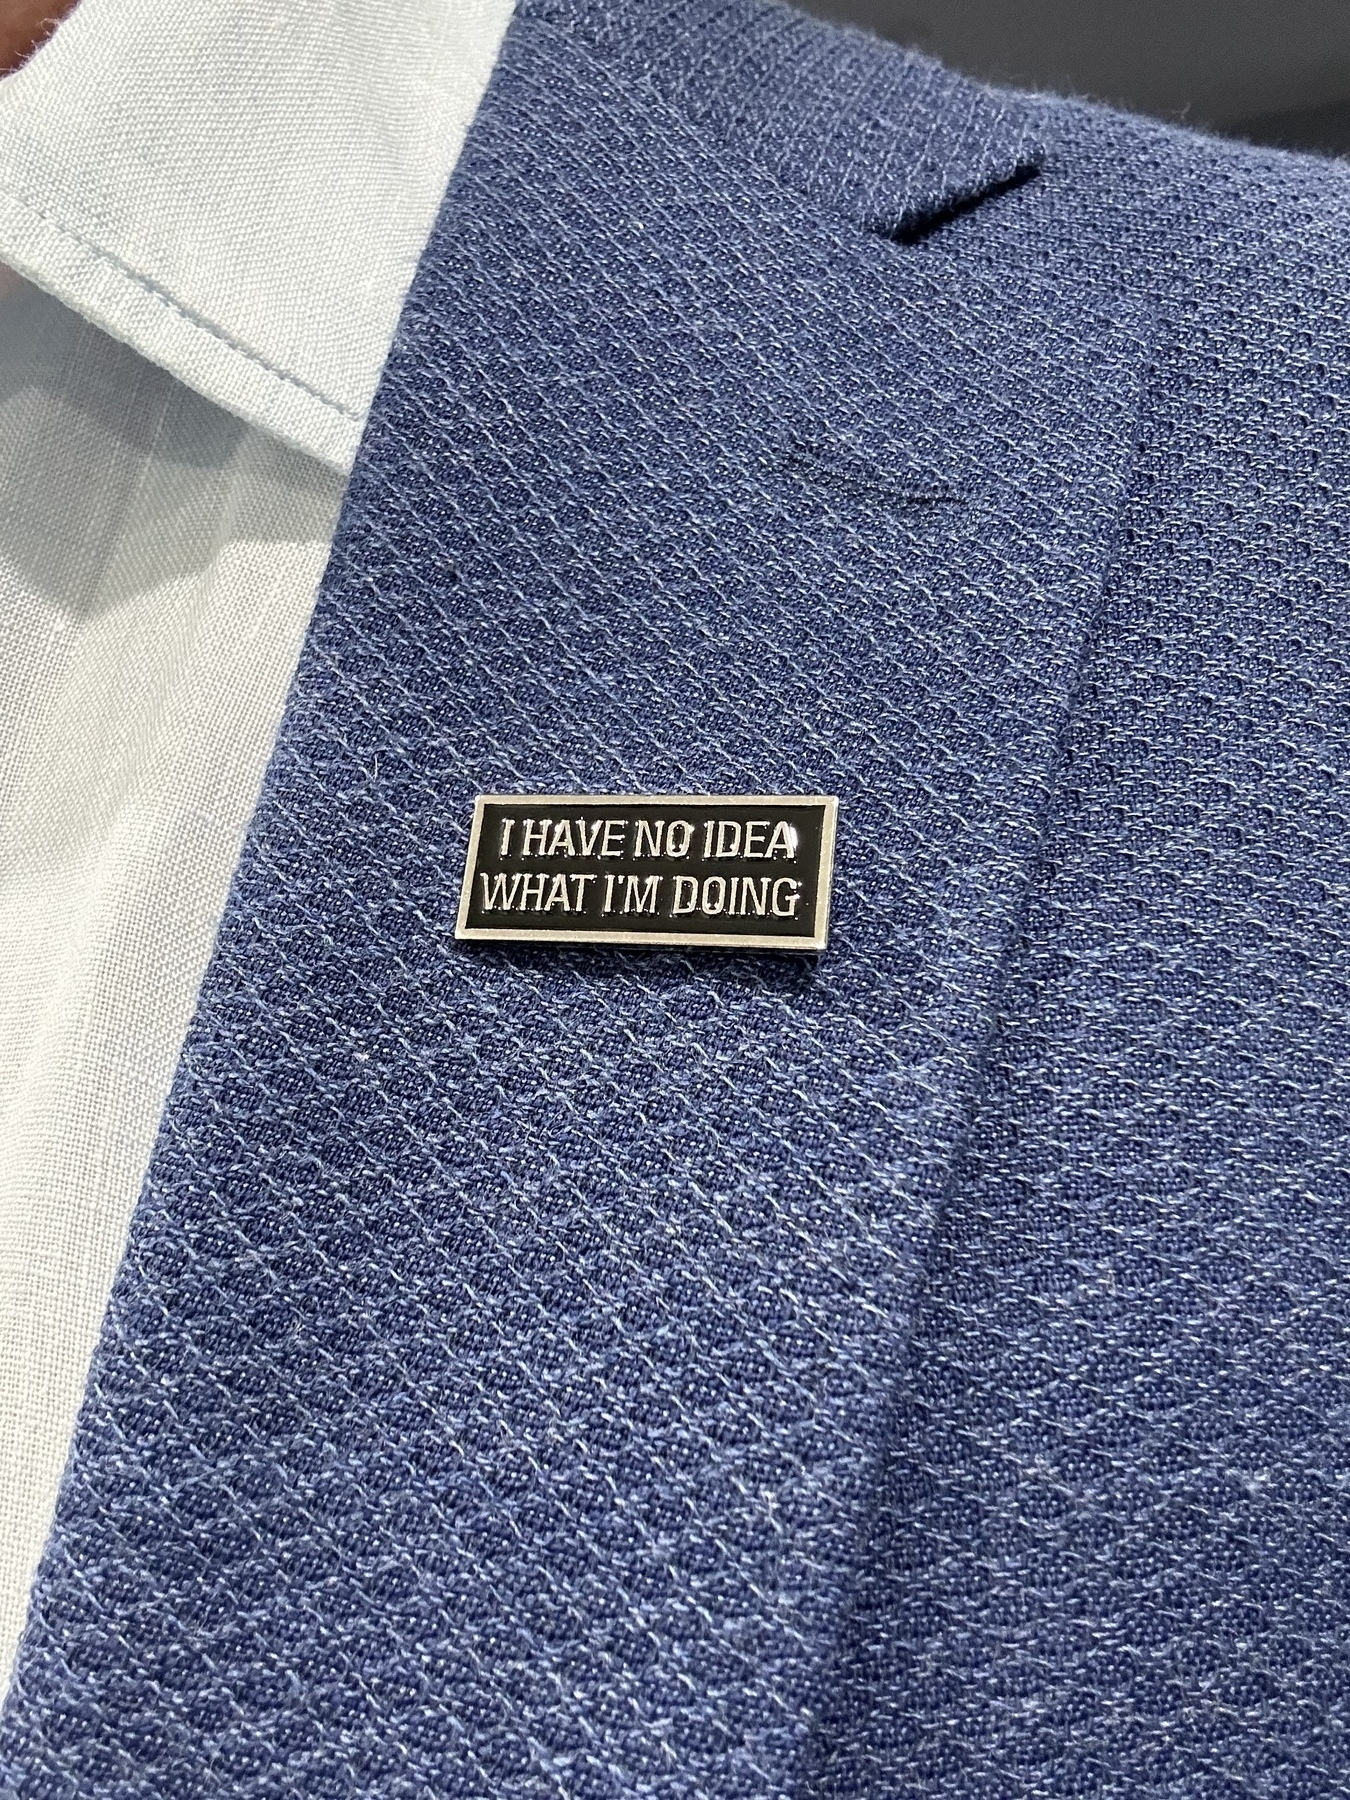 A rectangular silver badge on a blue jacket. The badge says “I have no idea what I’m doing”